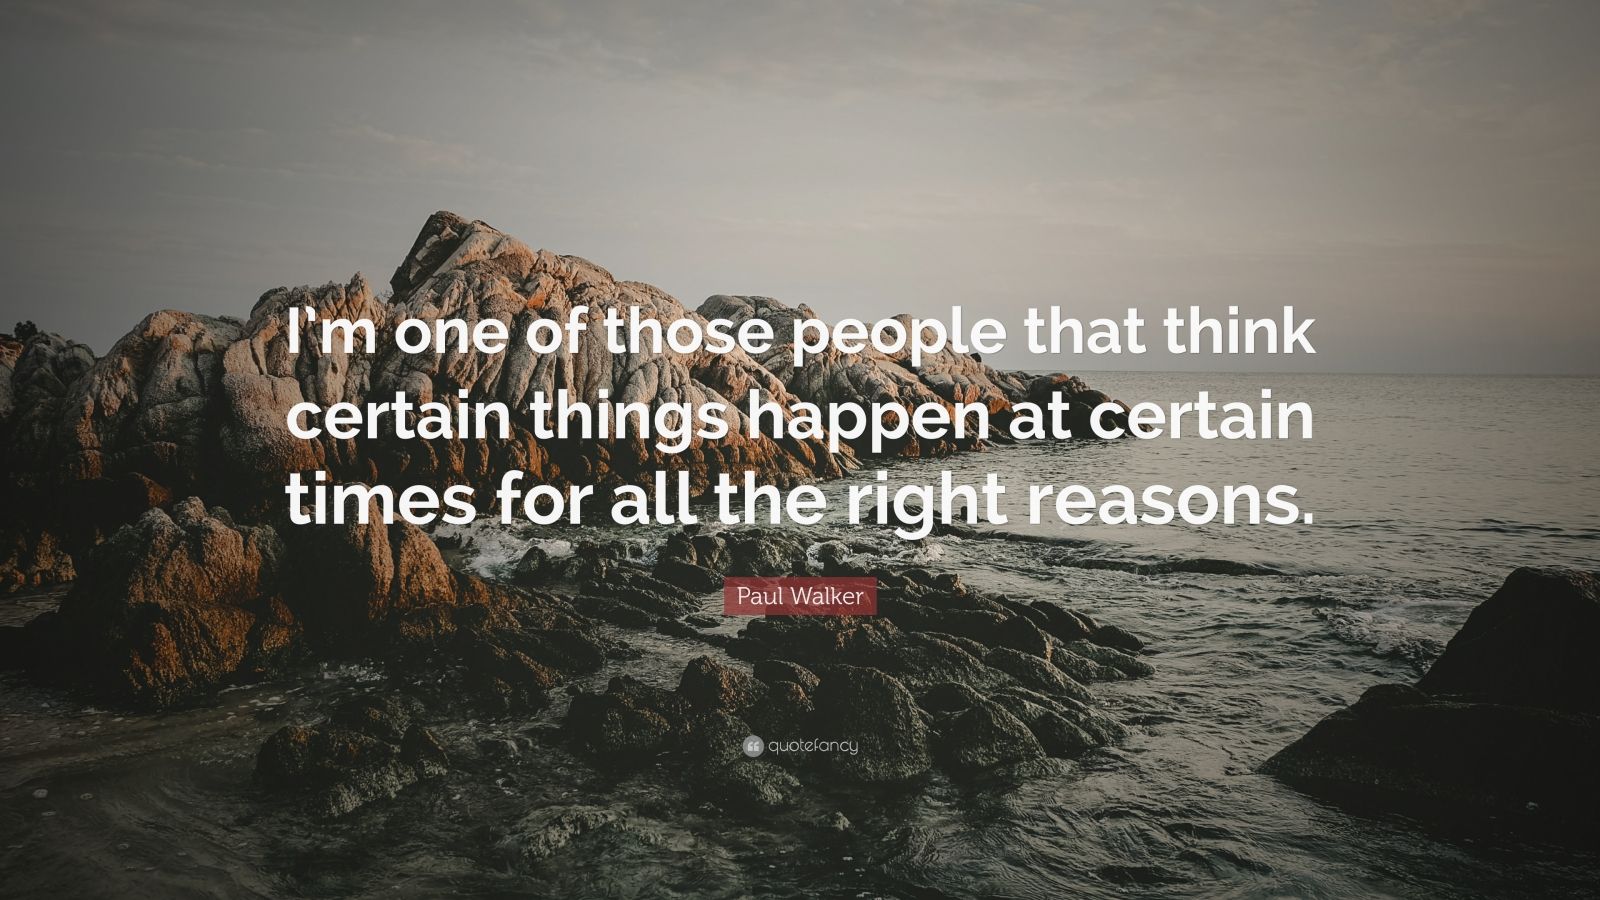 Paul Walker Quote: “I’m one of those people that think certain things ...